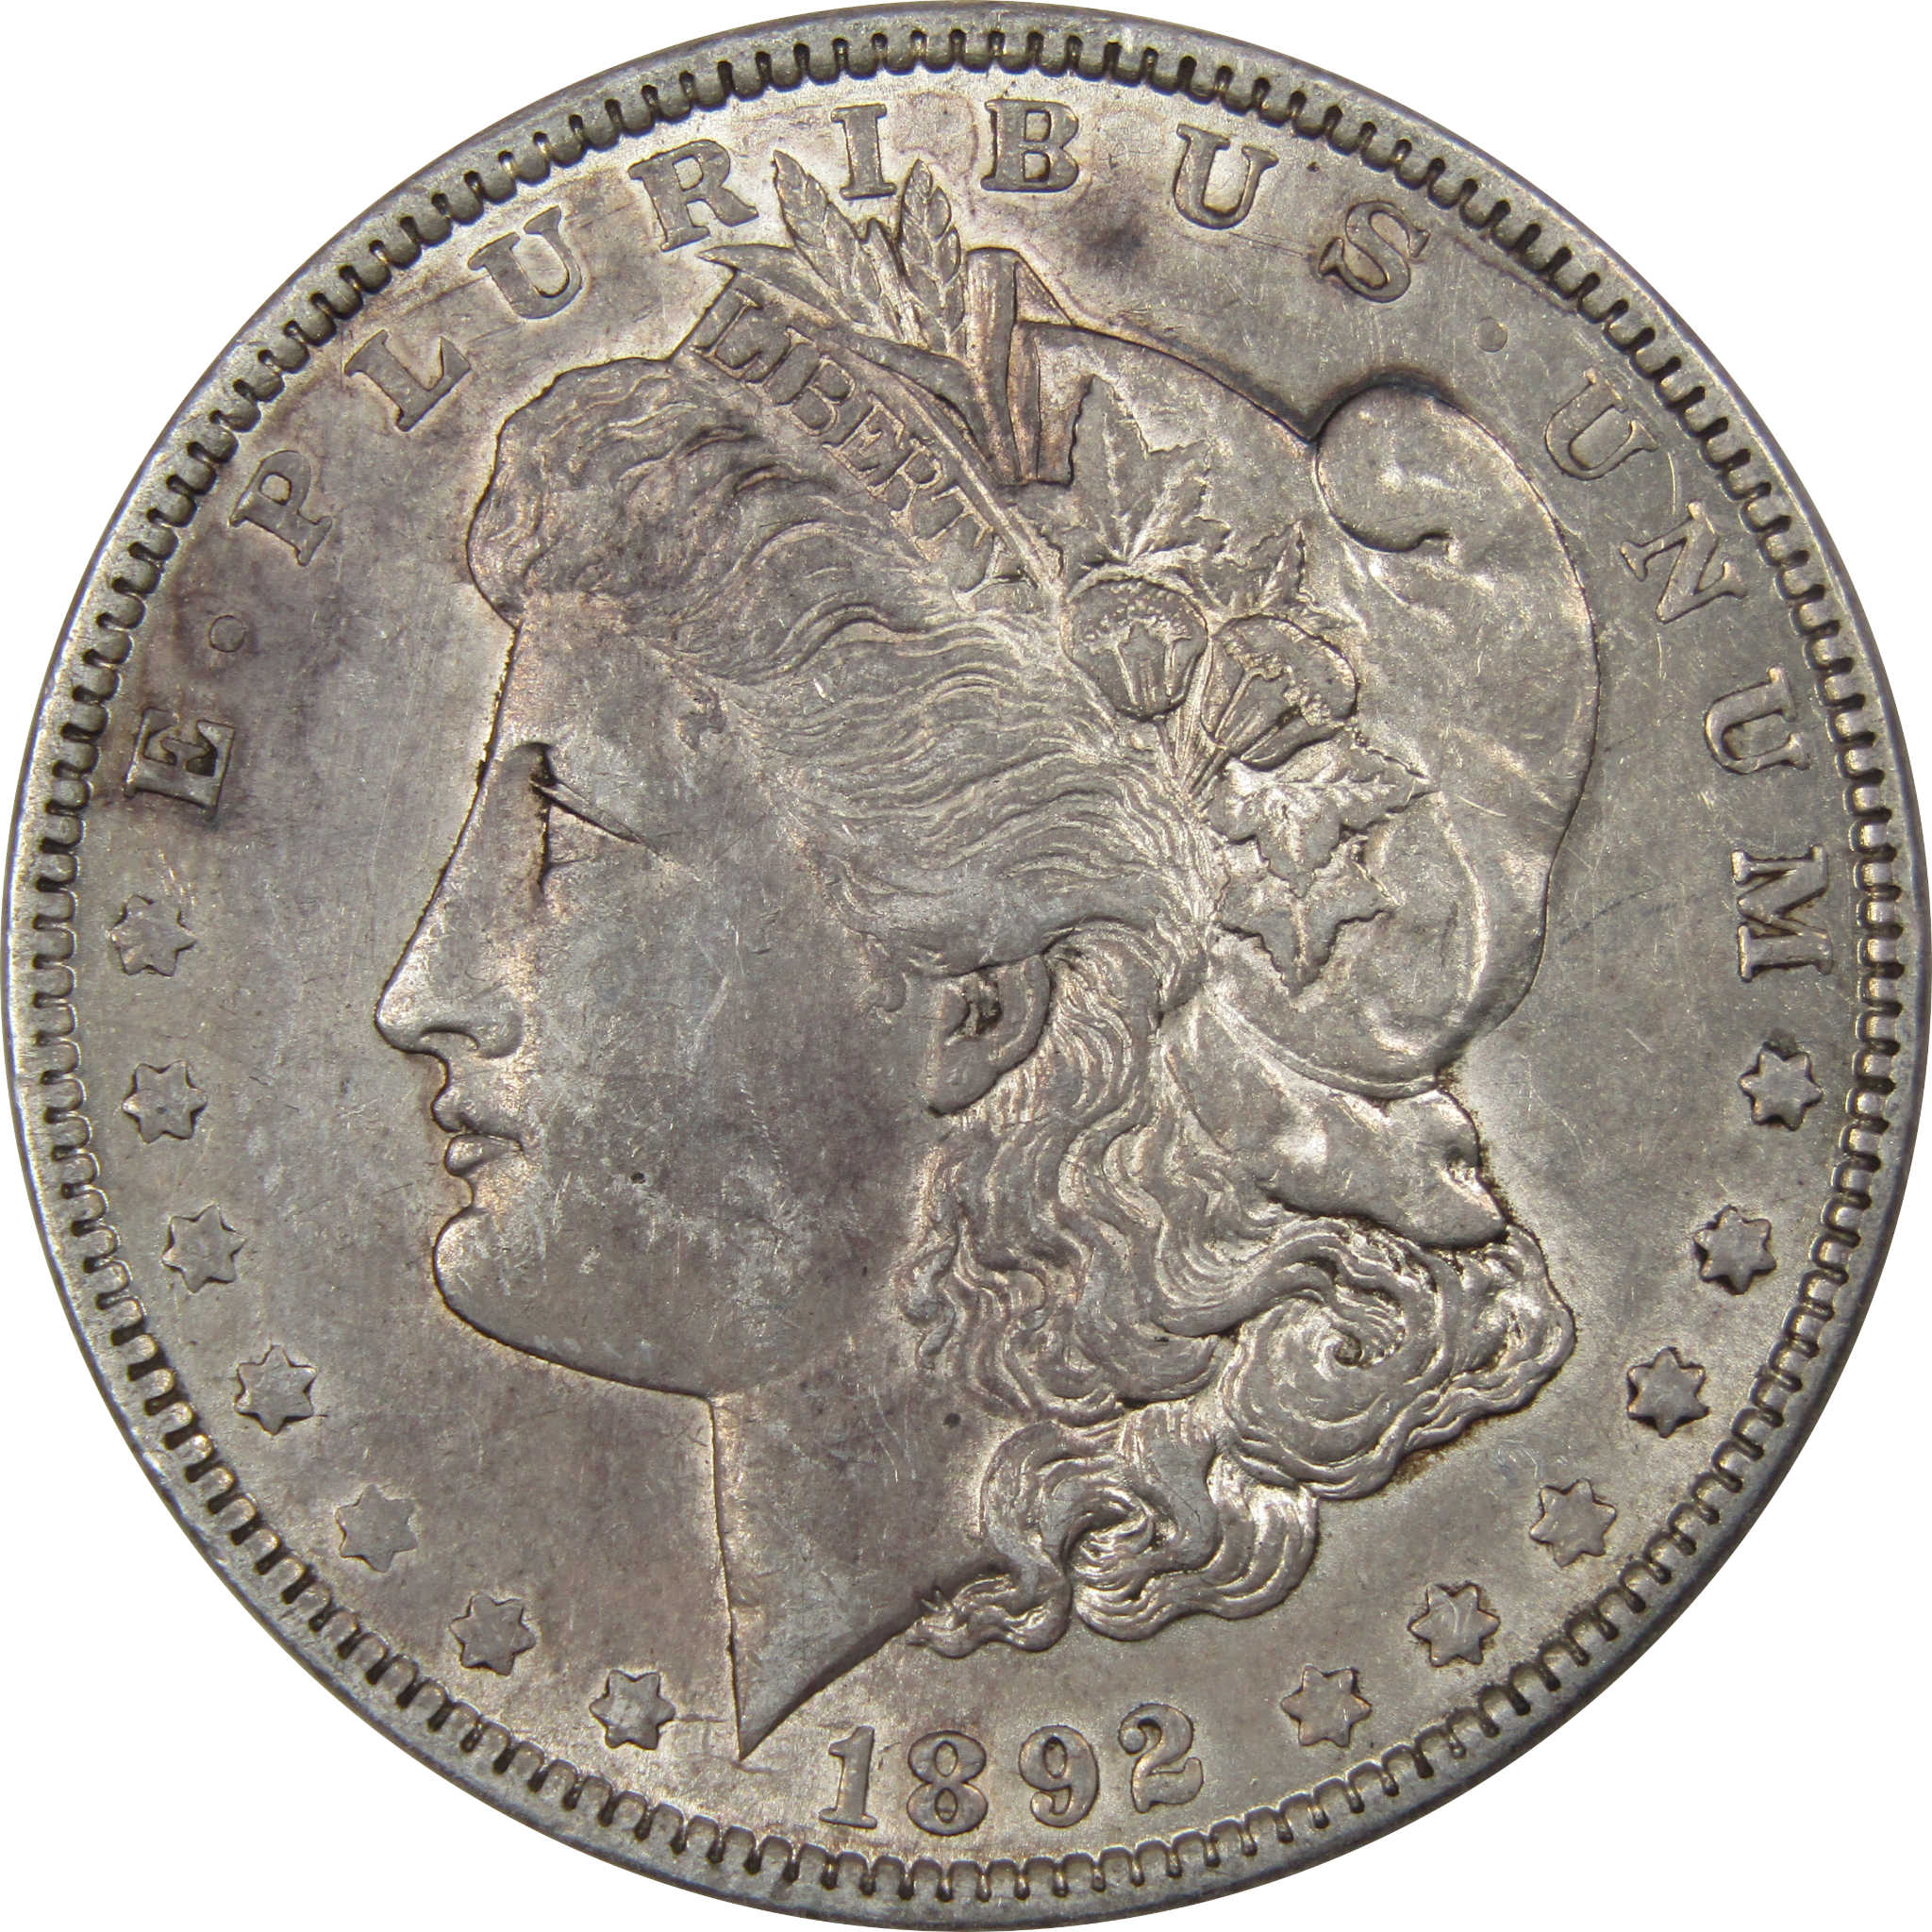 1892 Morgan Dollar AU About Uncirculated 90% Silver Coin SKU:I1296 - Morgan coin - Morgan silver dollar - Morgan silver dollar for sale - Profile Coins &amp; Collectibles